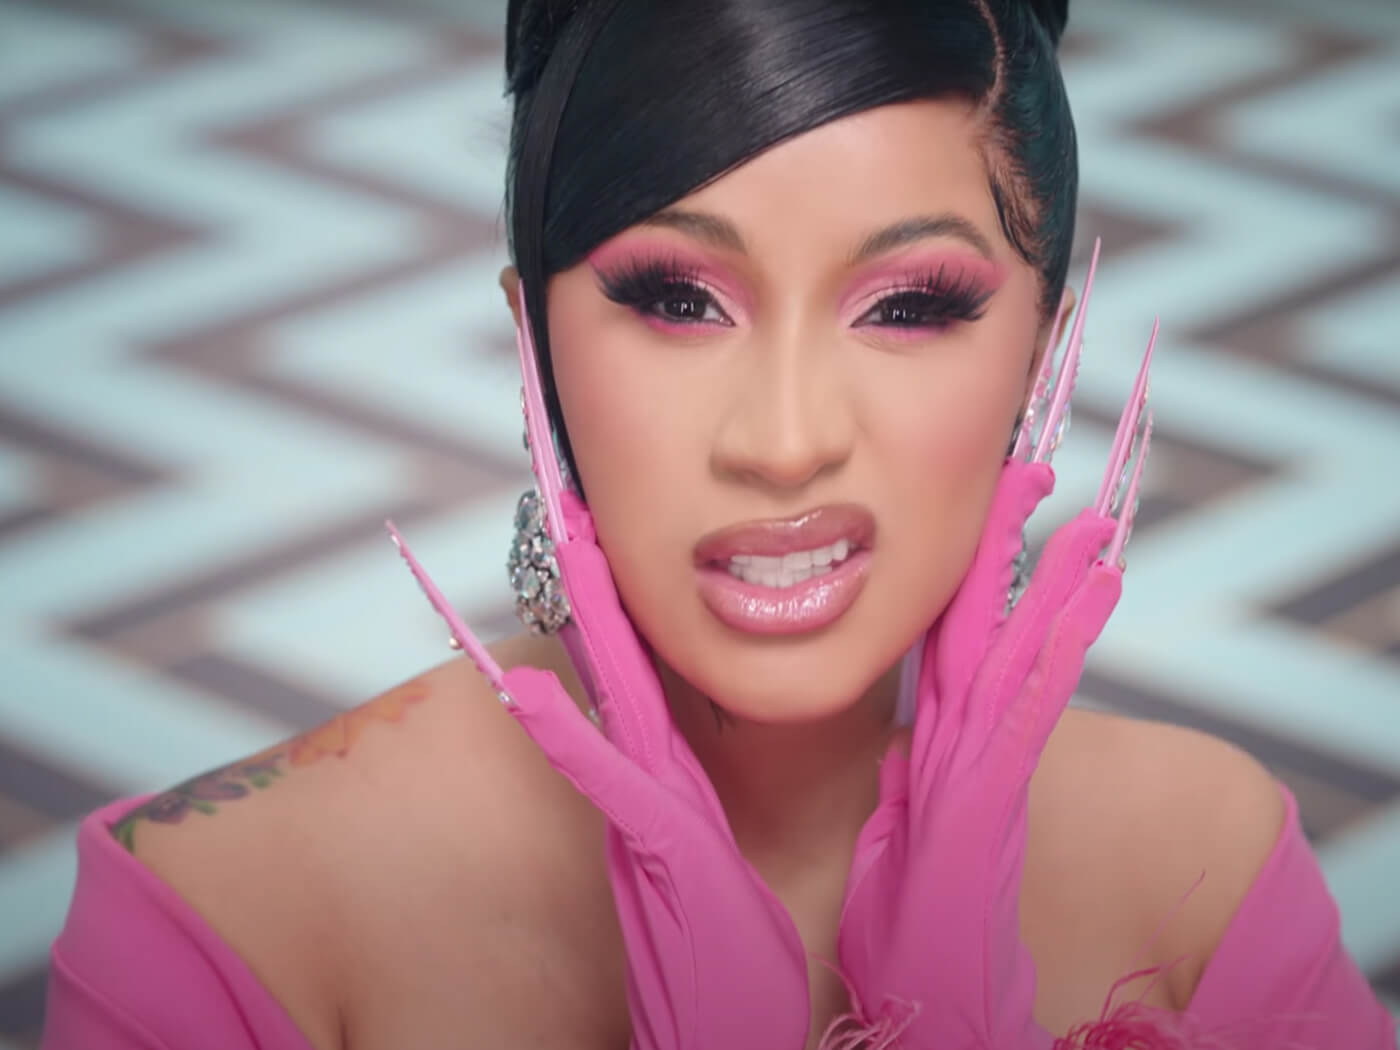 Cardi B defends Kylie Jenner cameo in “WAP” video